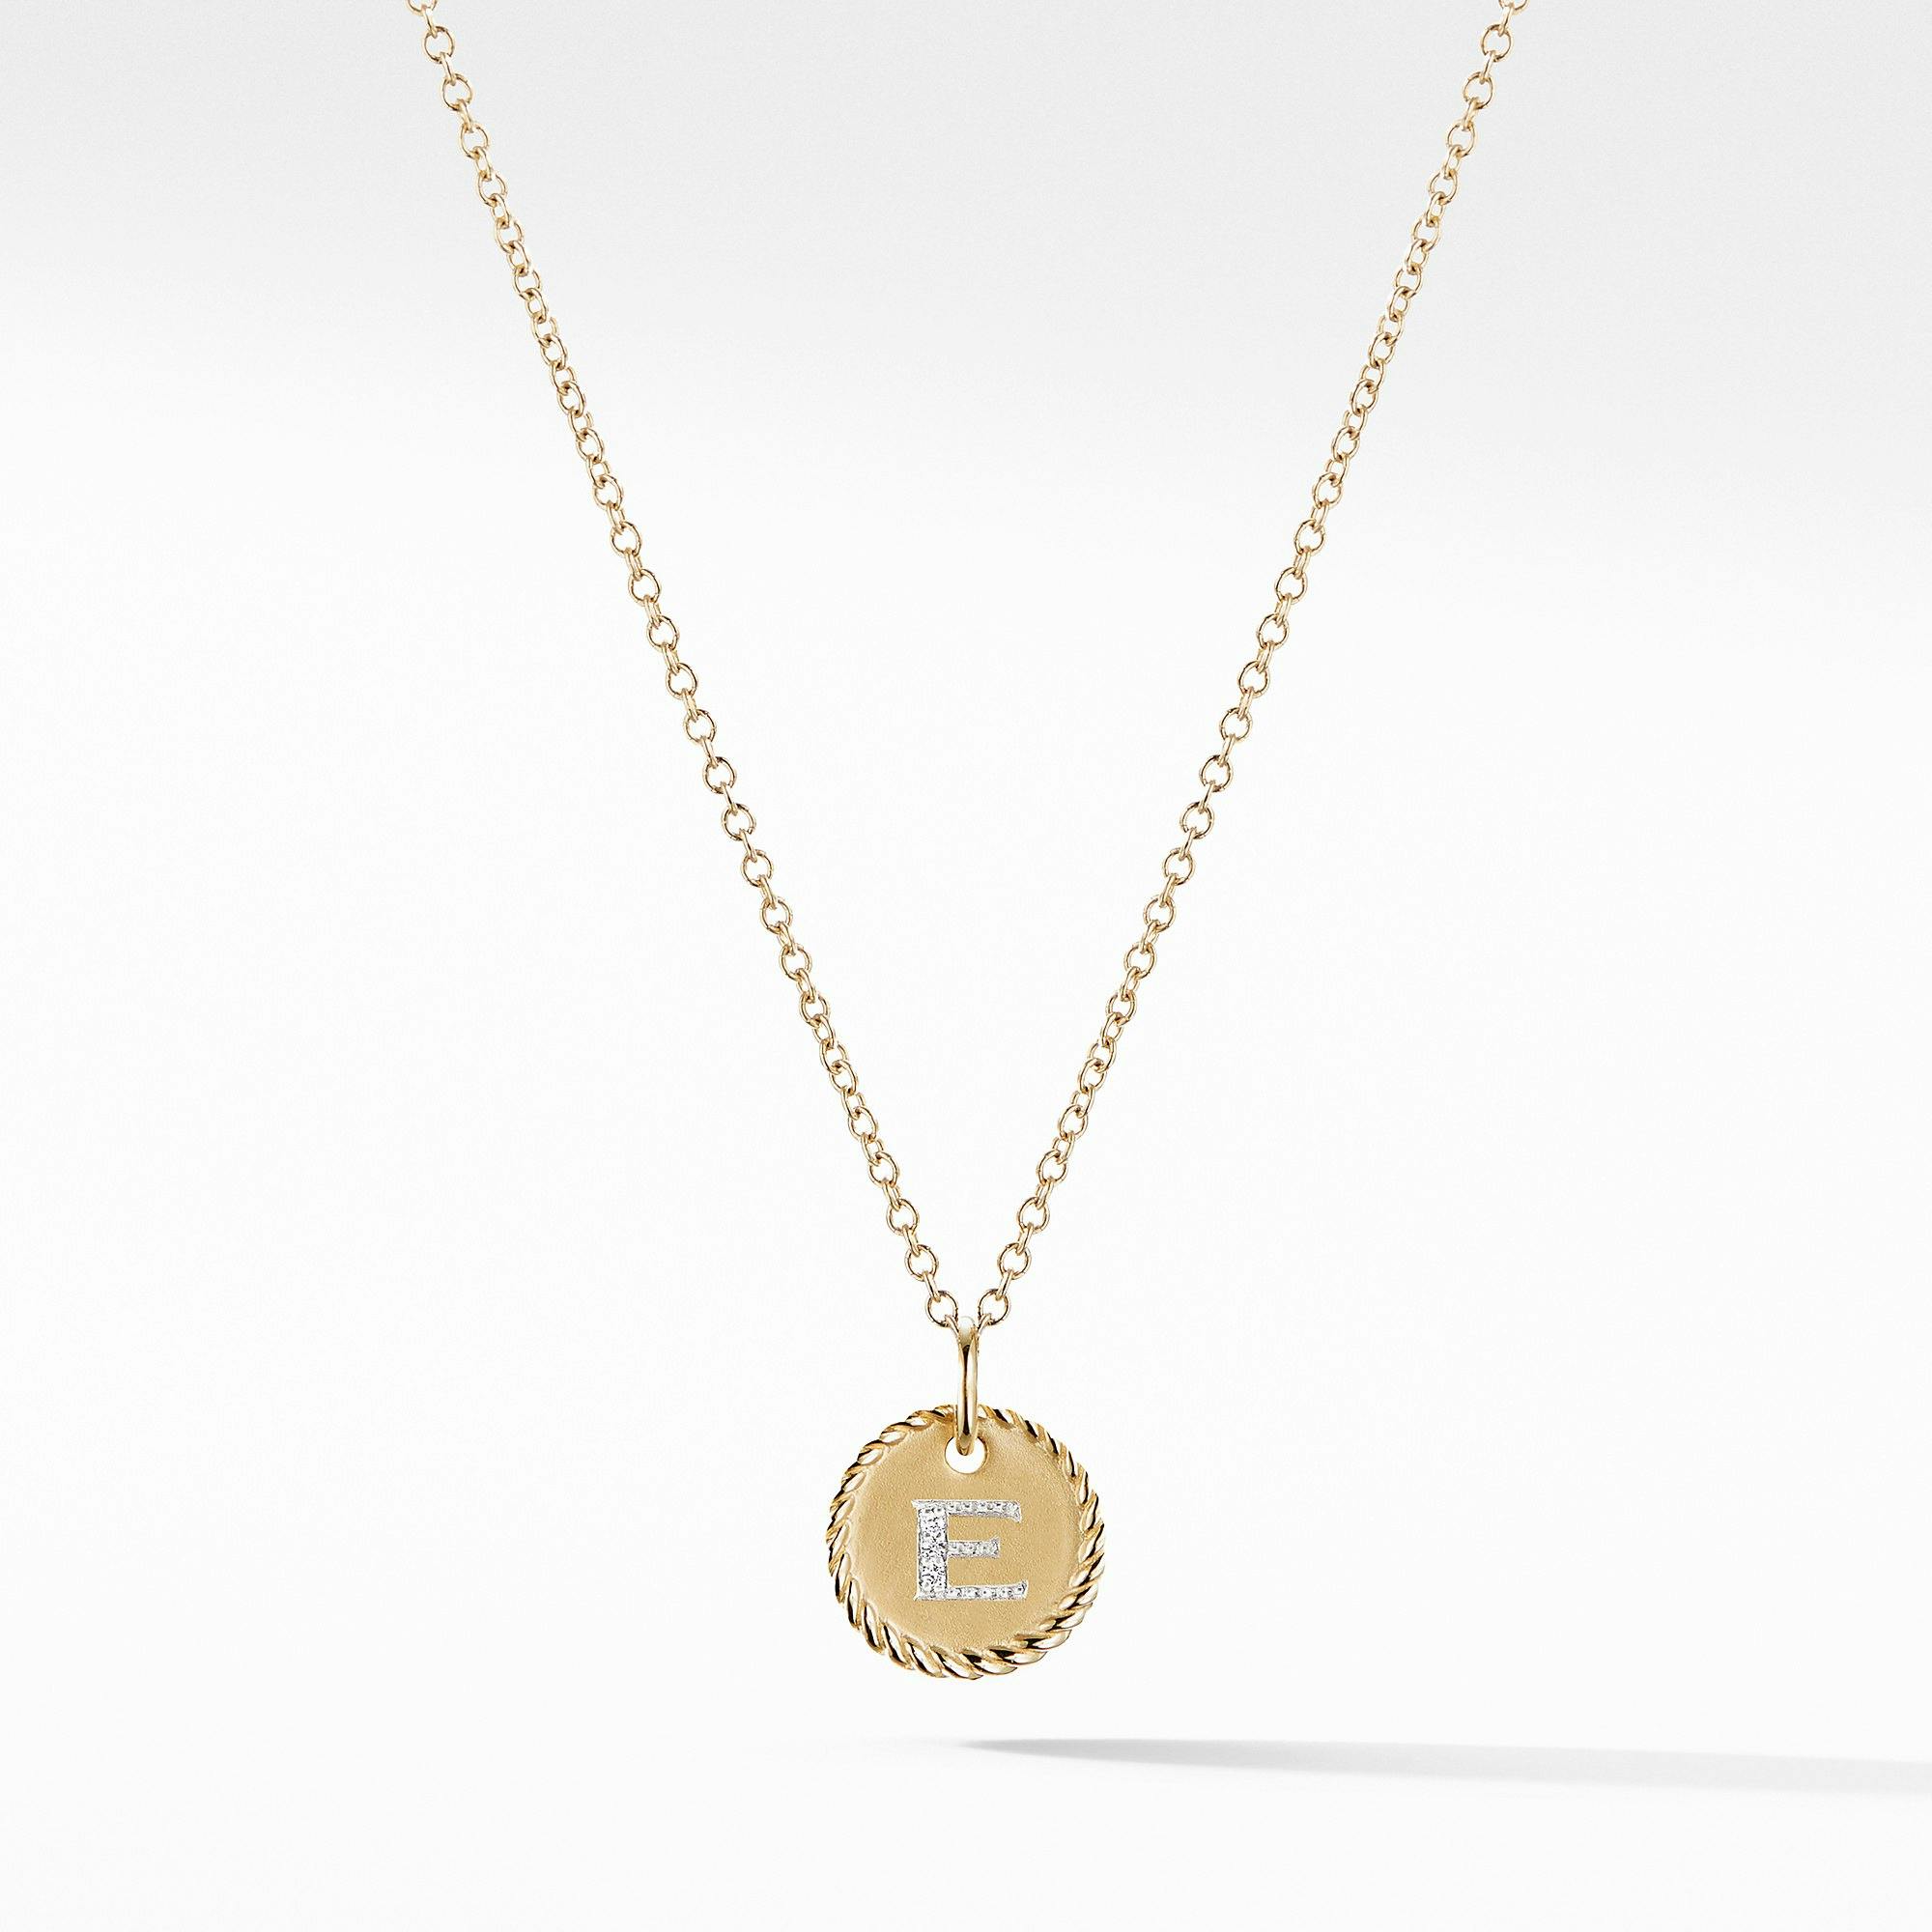 David Yurman "E" initial Charm Necklace with Diamonds in Yellow Gold